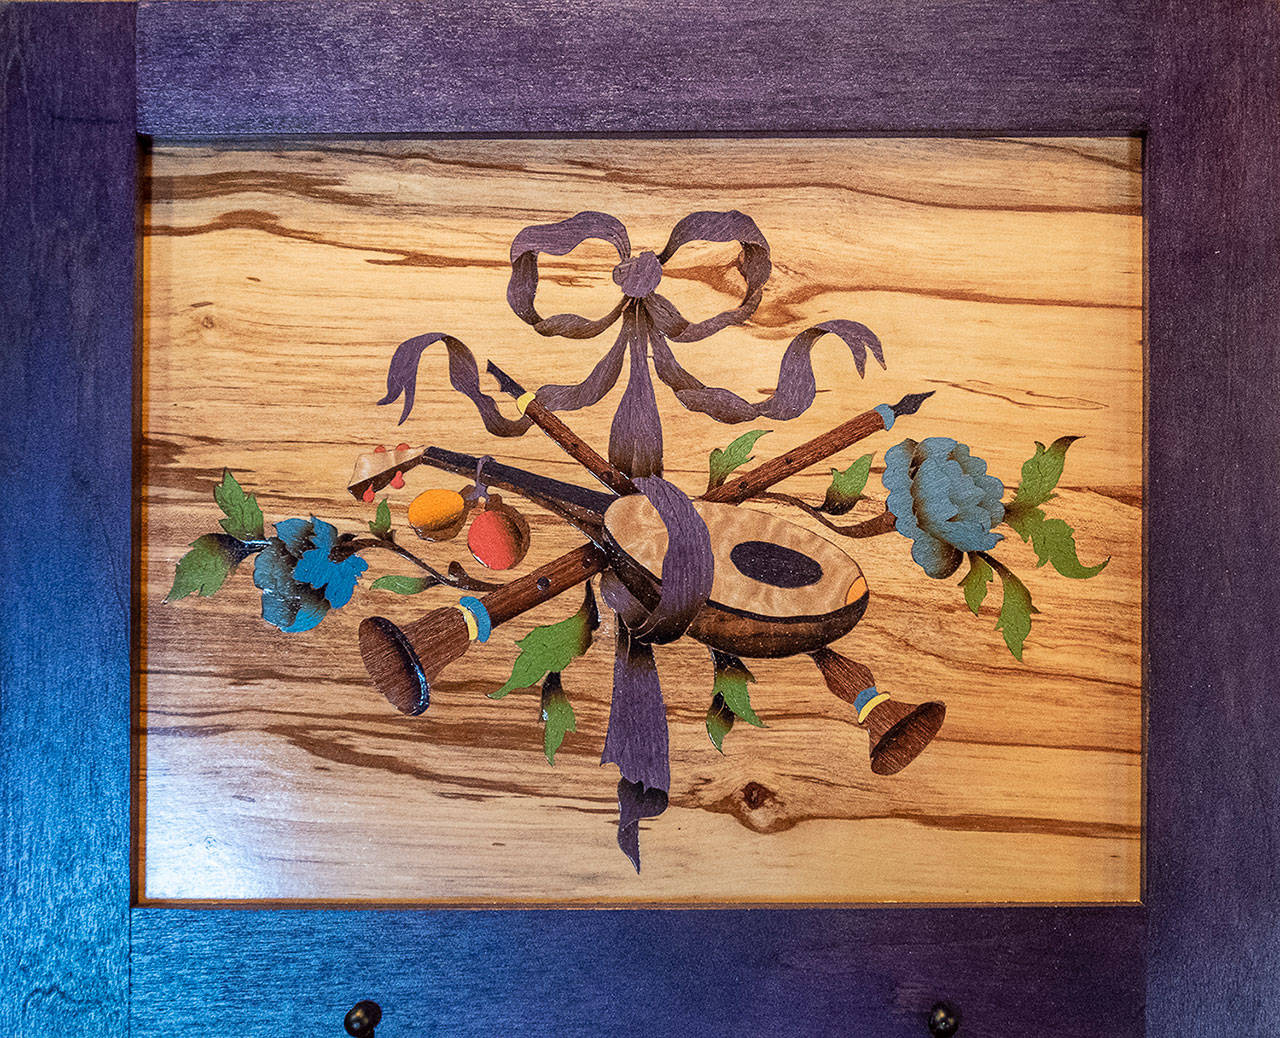 “Marquetry” by Steve Portner, whose work will be on display at ARTjam on Sept. 4 and 5. Submitted art